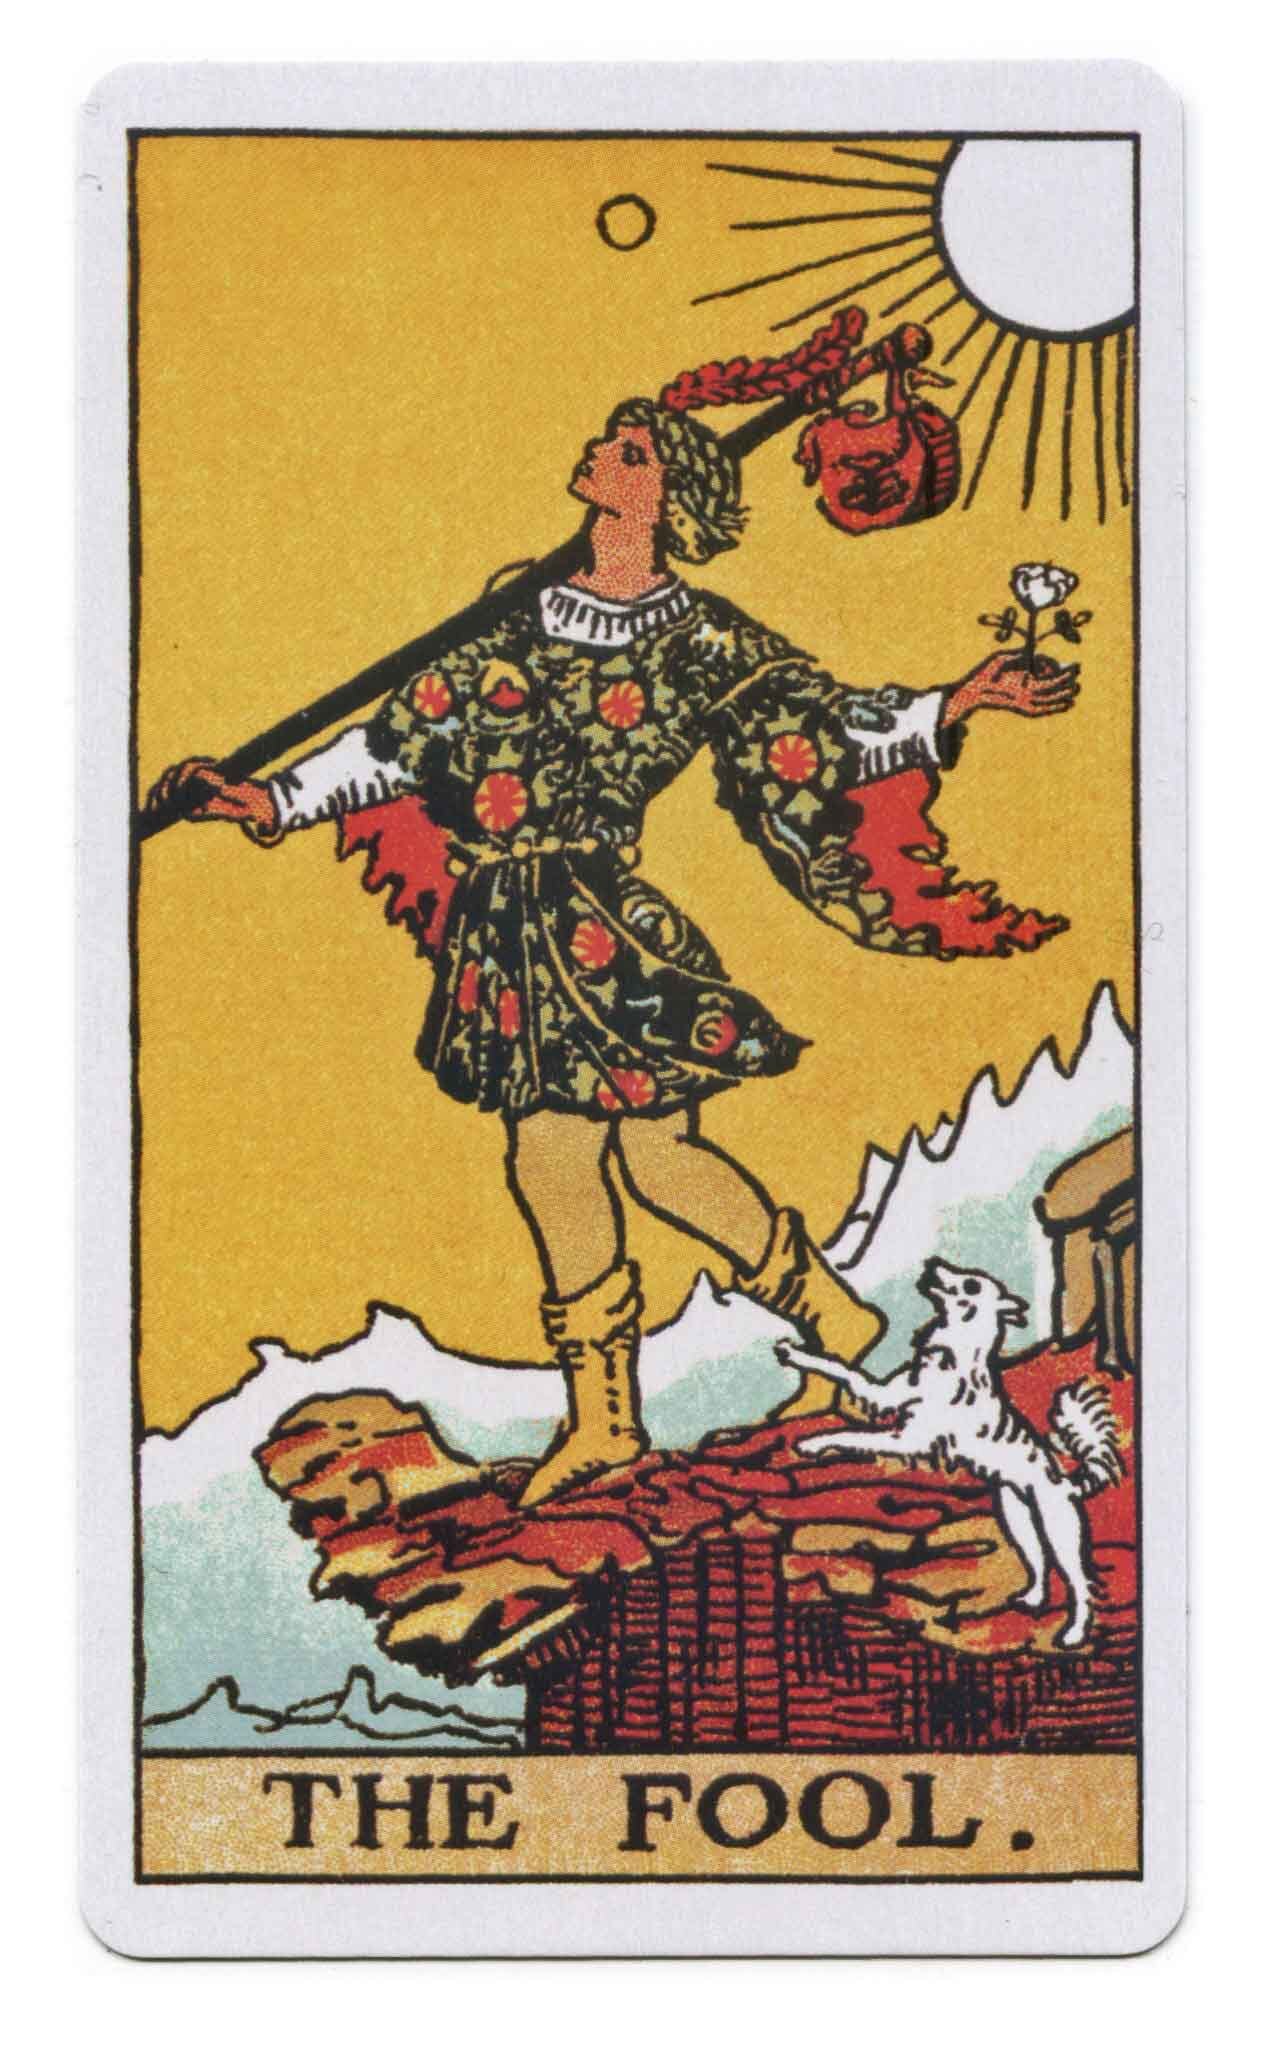 Opinion: Tarot isn't just about the future, but making sense of